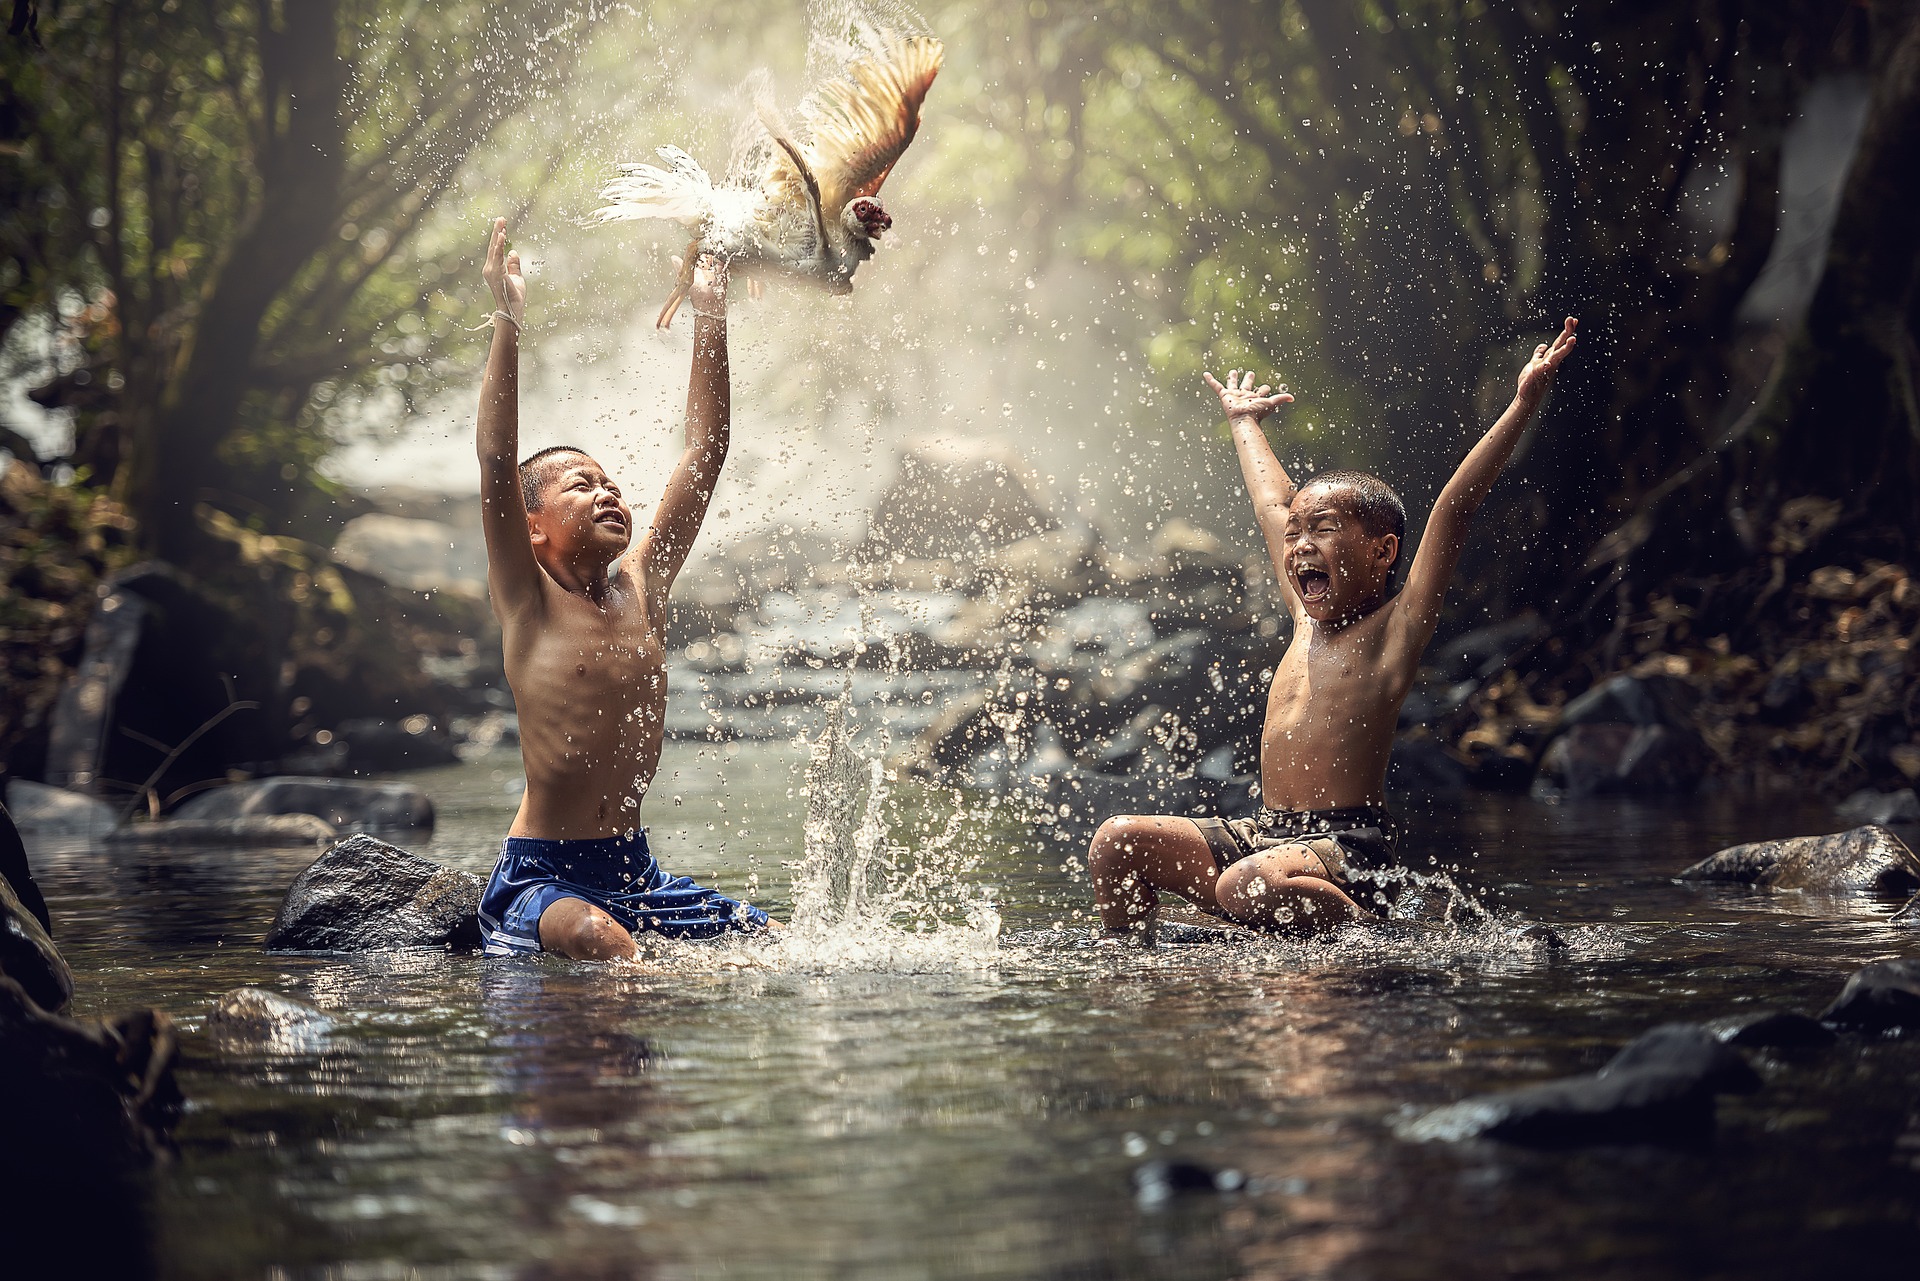 Two boys are playing in a forest stream, splashing water joyfully, whilst a bird flies between them